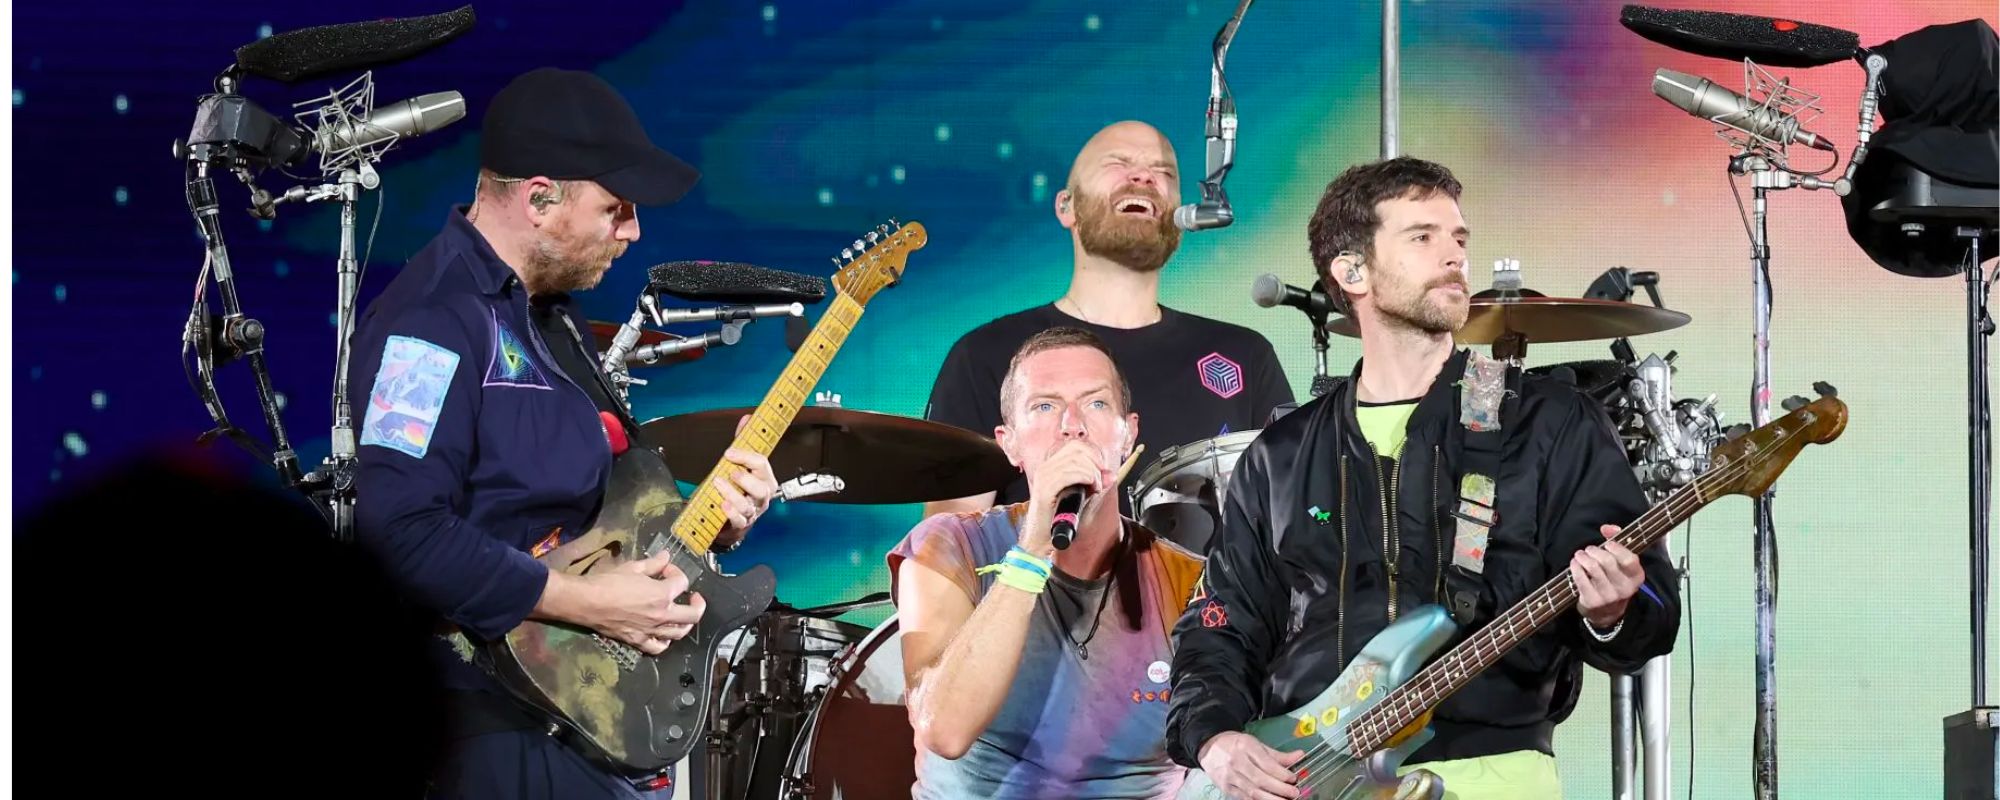 How To Buy Tickets to Coldplay Australia and Asia Tour Dates in 2023